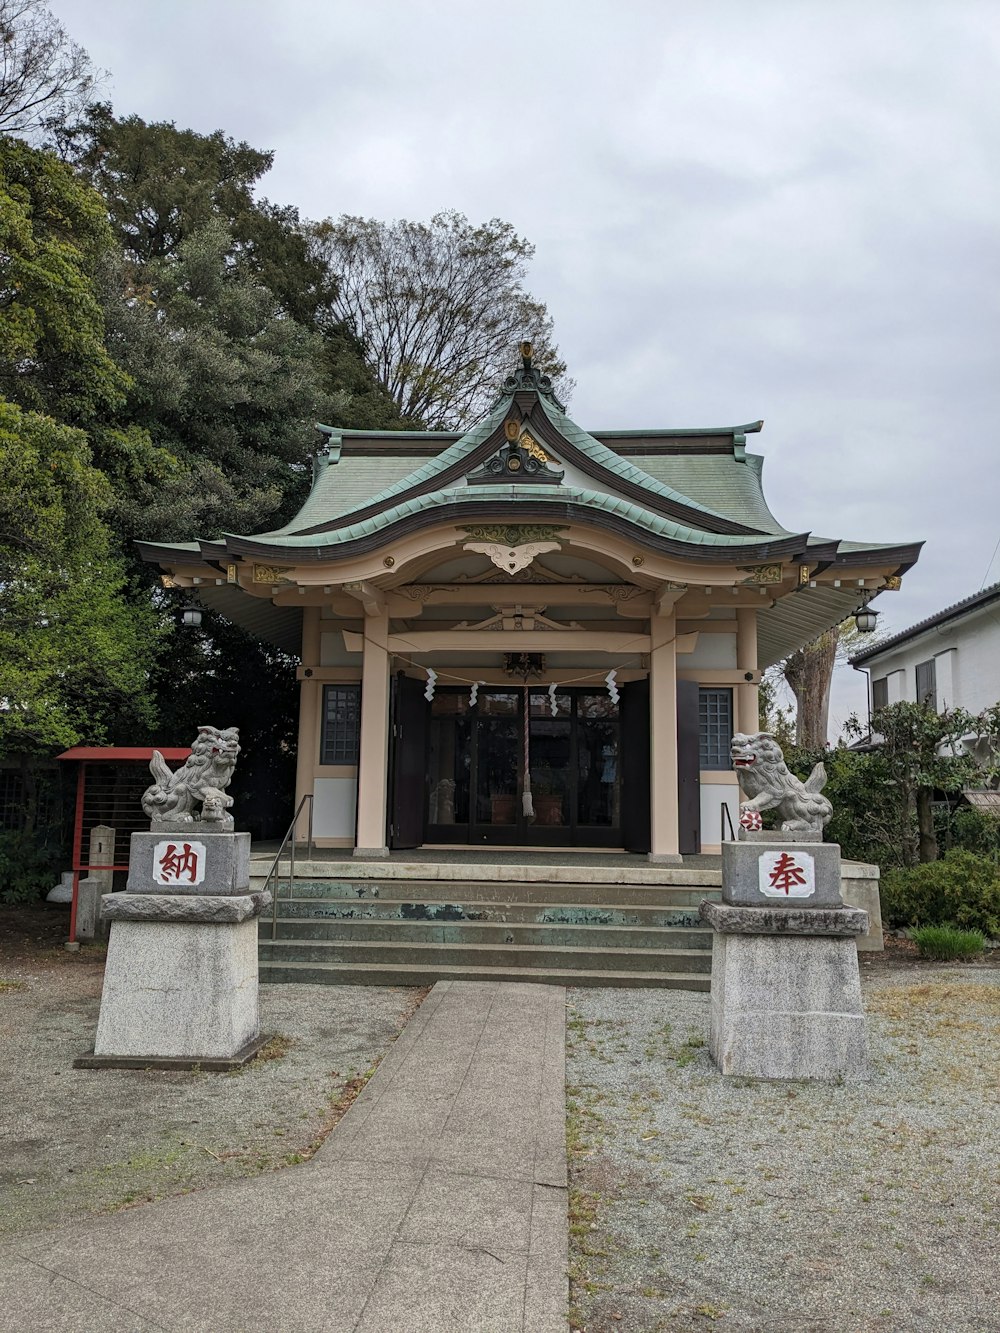 a small building with statues in front of it